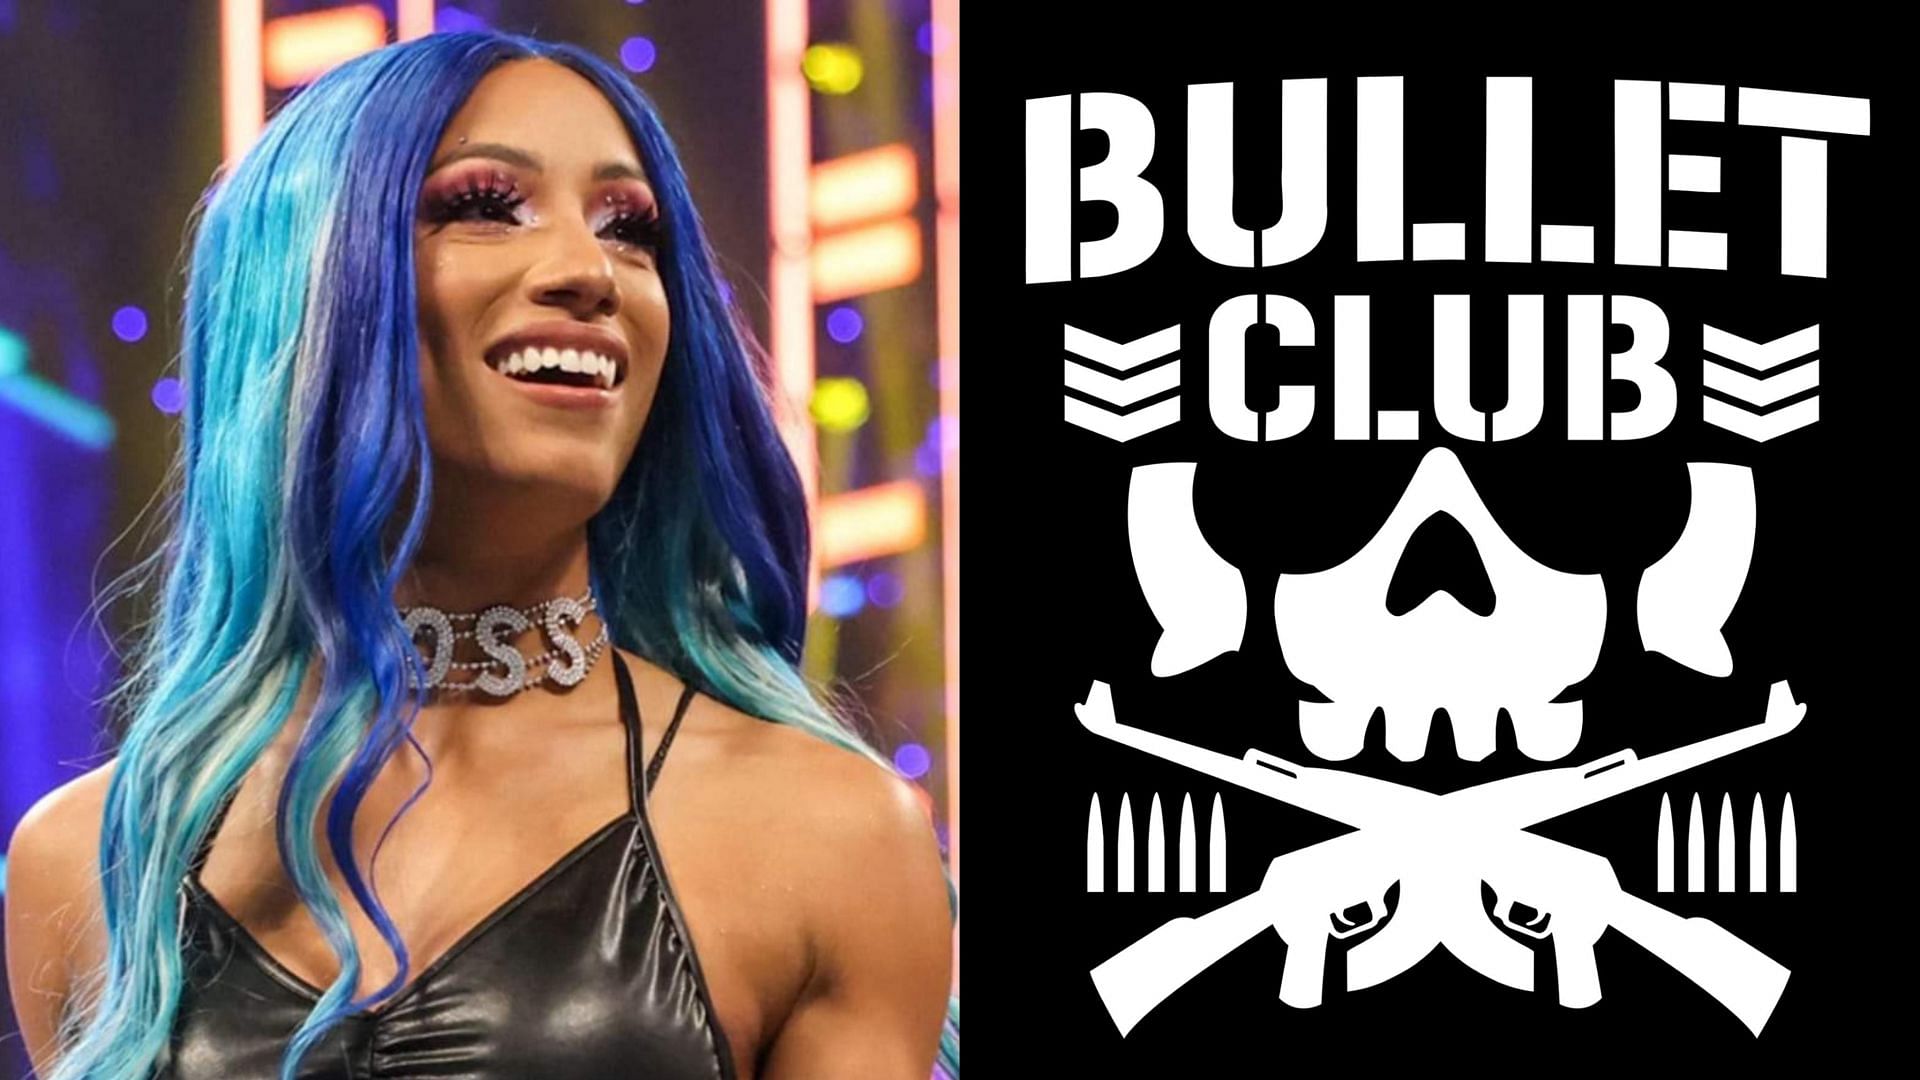 Sasha Banks is rumored to have signed with New Japan Pro Wrestling